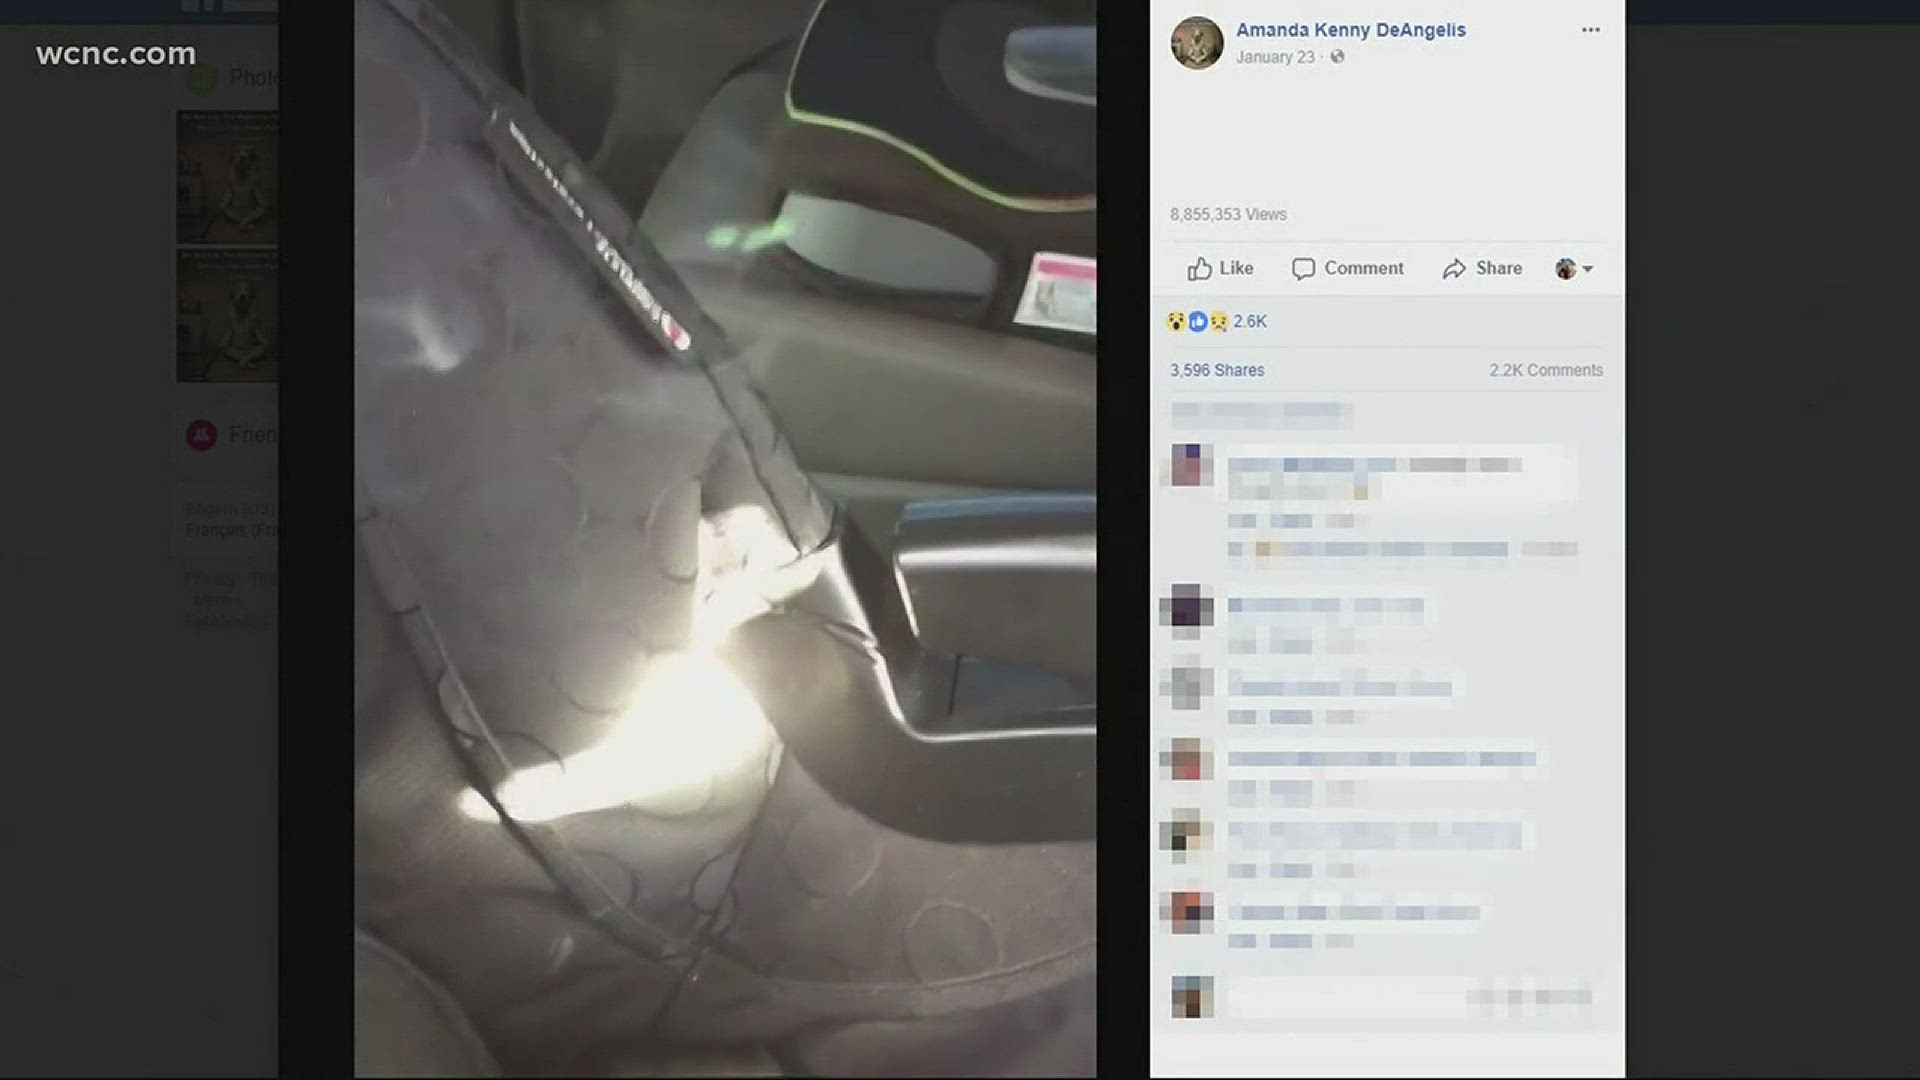 Amanda DeAngelis posted a video of the seat smoking on Facebook to warn other parents. As of Wednesday night, it had more than 82,000 shares and 8.8 million views.